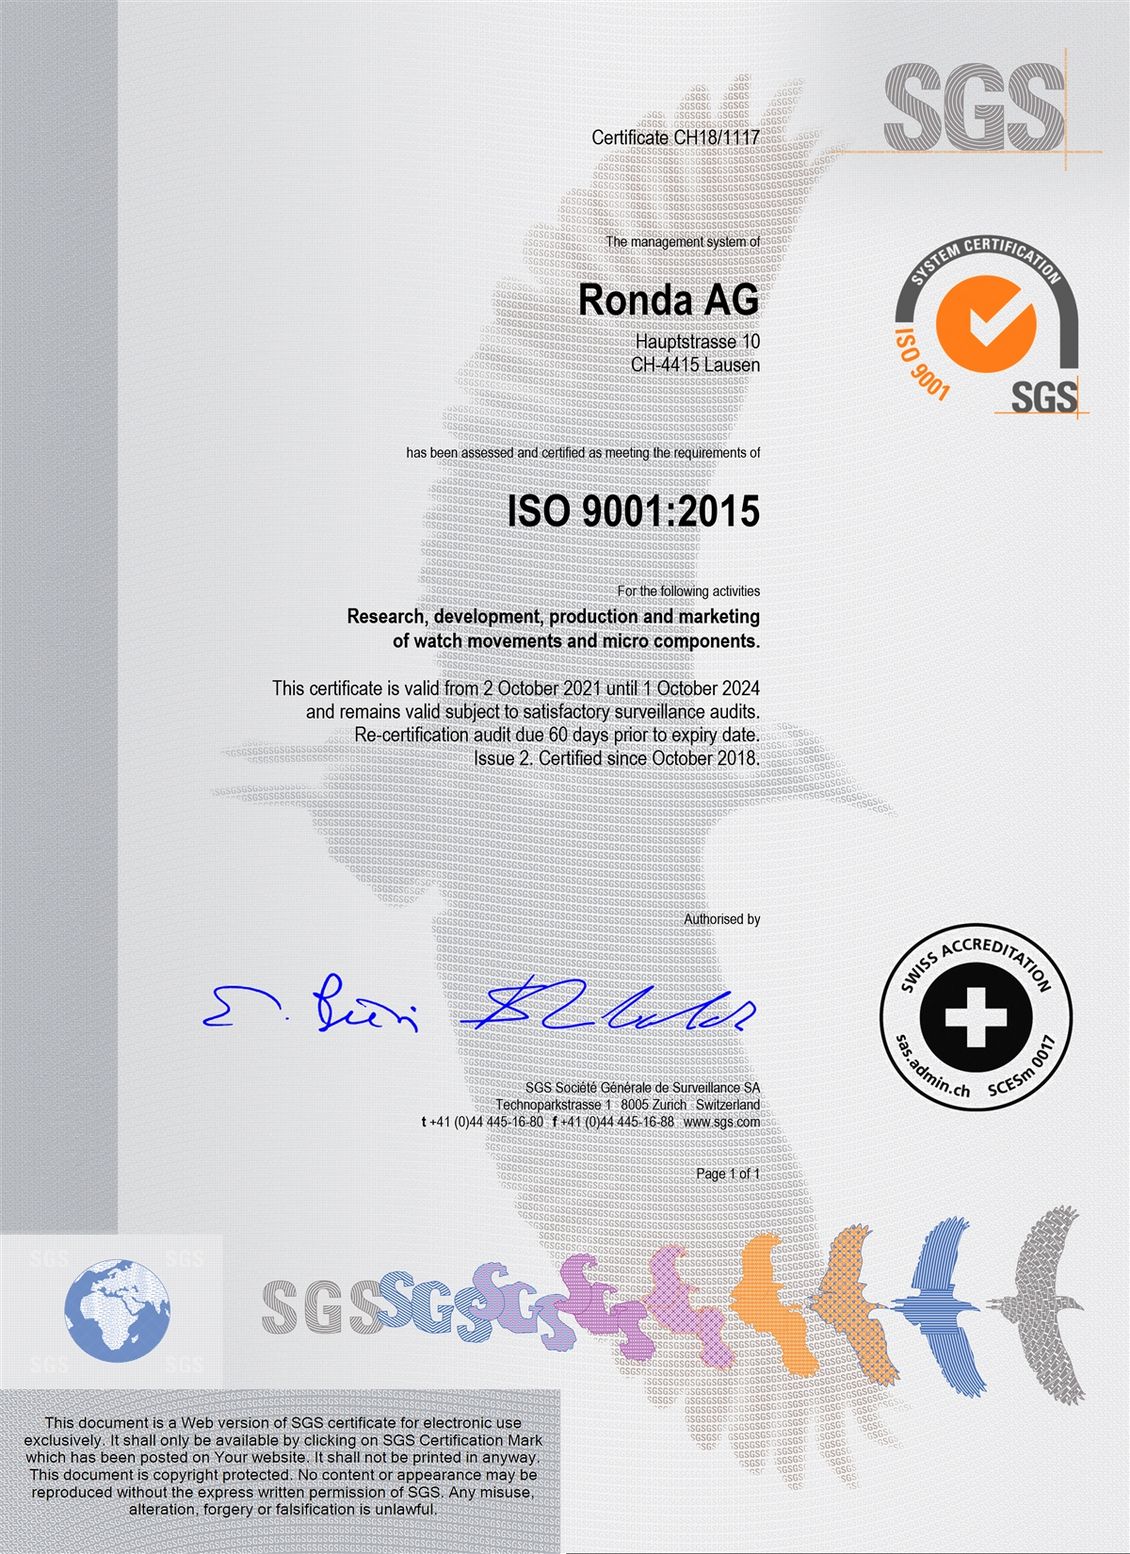 [Translate to Chinese:] ISO 9001